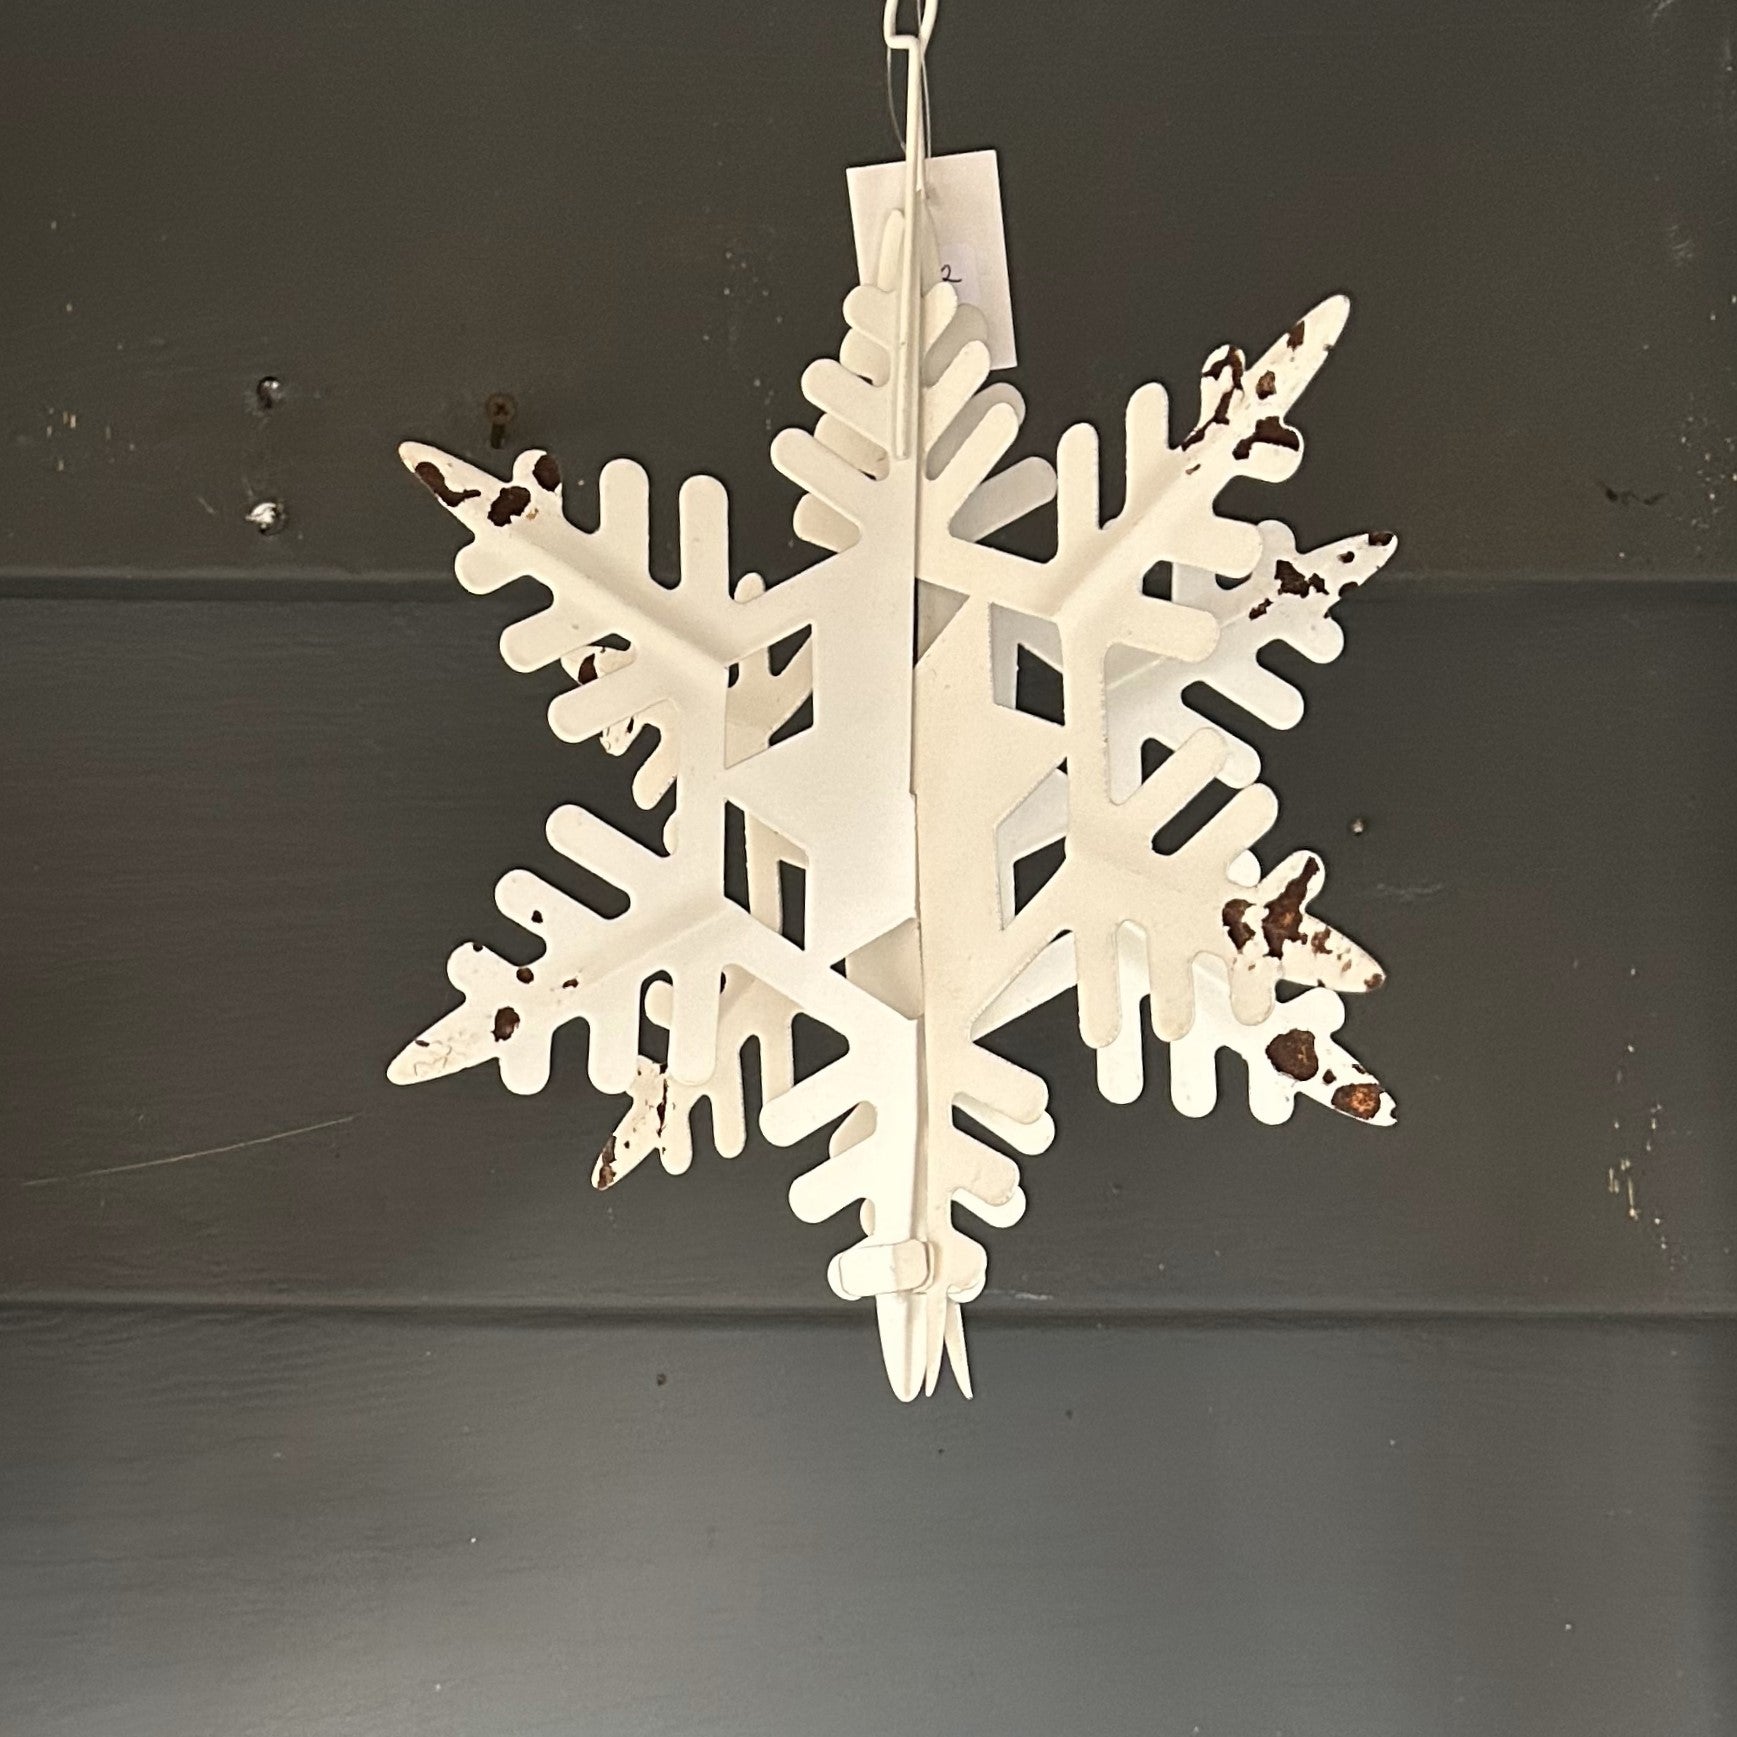 How cute are these rustic metal white snowflakes!? We love the way they fit together and hang. Complete with jute rope, they are an easy way to decorate your porch ceiling, add dimension to a room, create a farmhouse or whimsy vibe,...   They measure 8" in diameter.  